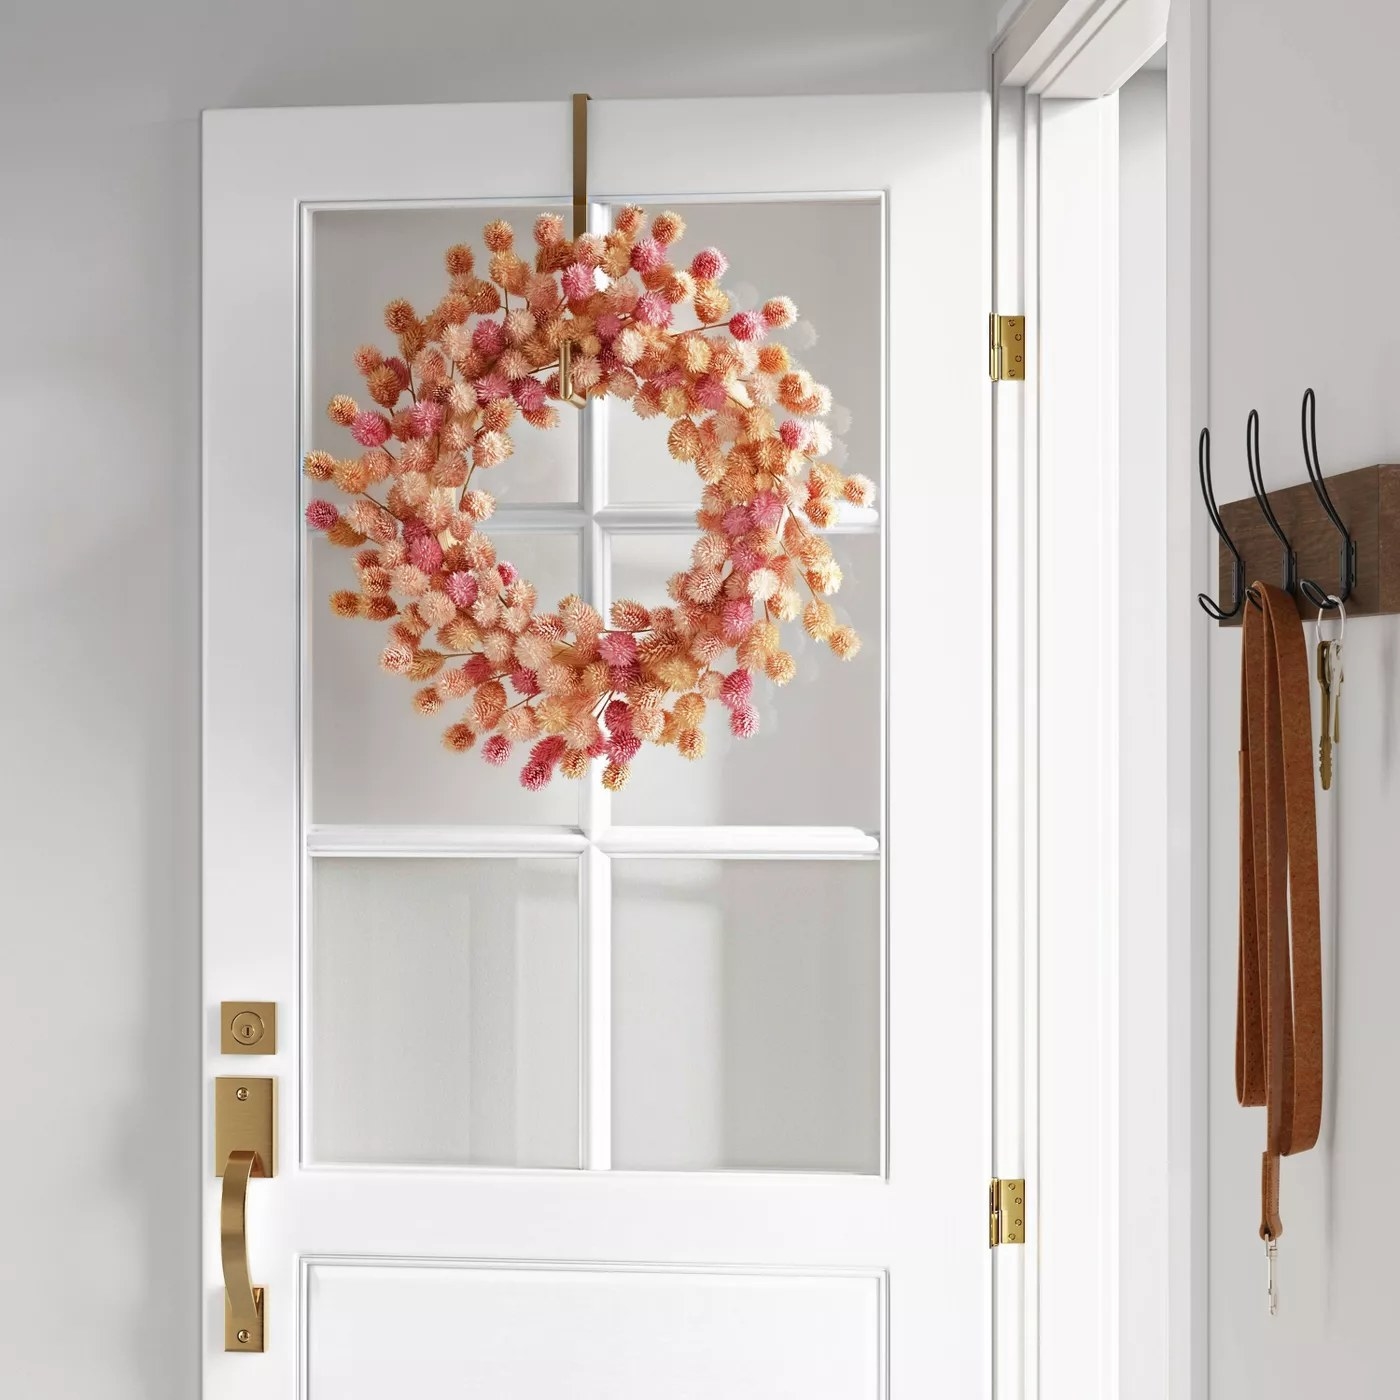 The wreath with faux flowers in various pink shades hanging on a door